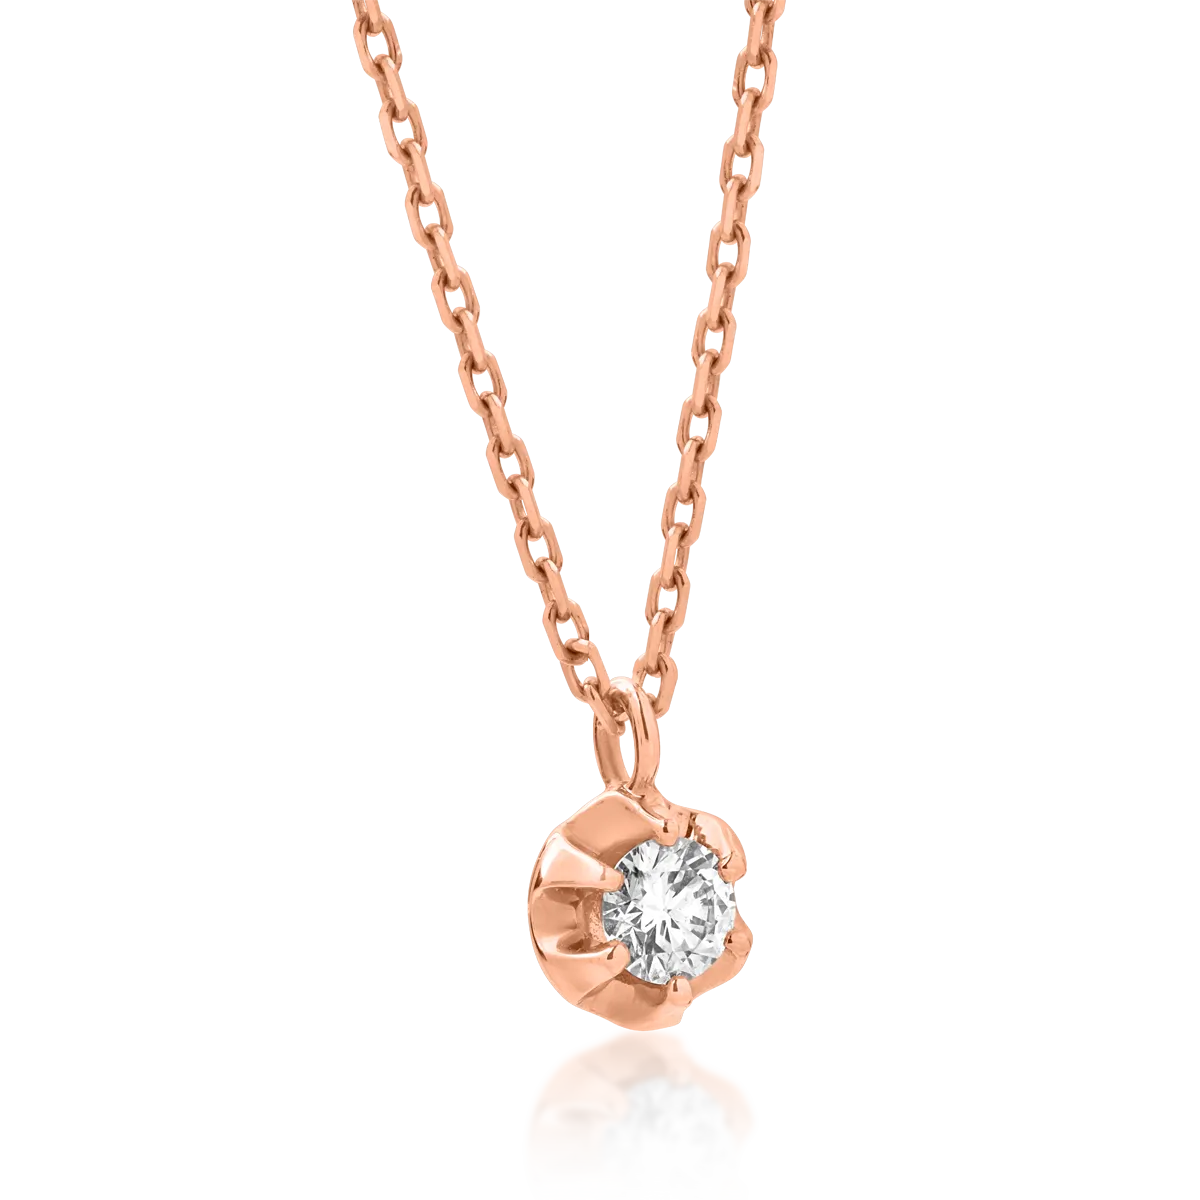 18K rose gold pendant necklace with 0.131ct diamond